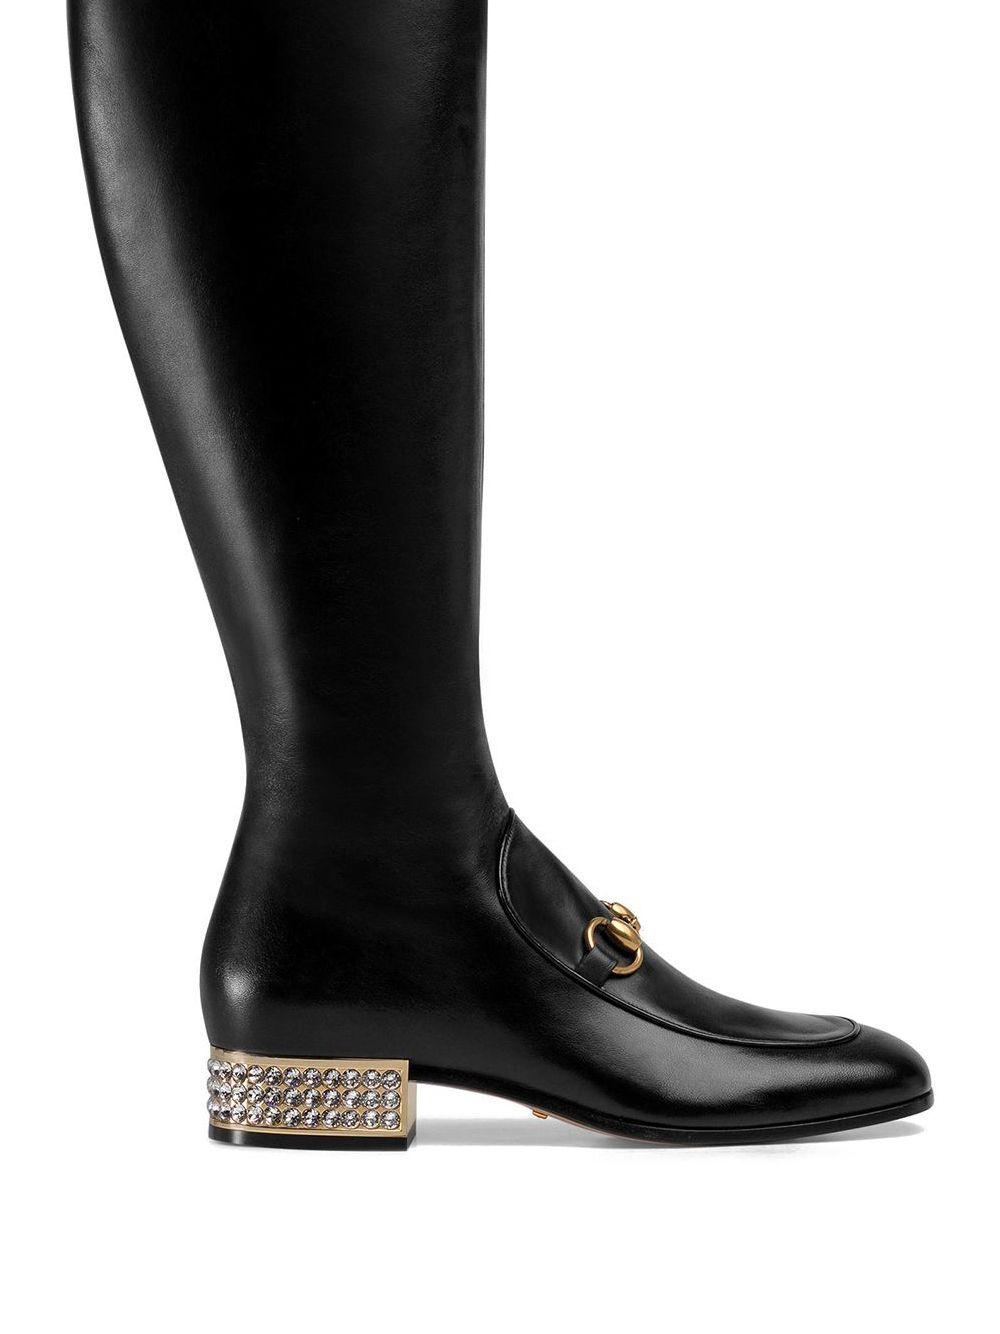 Gucci Leather Knee High Boots in Black - Gucci